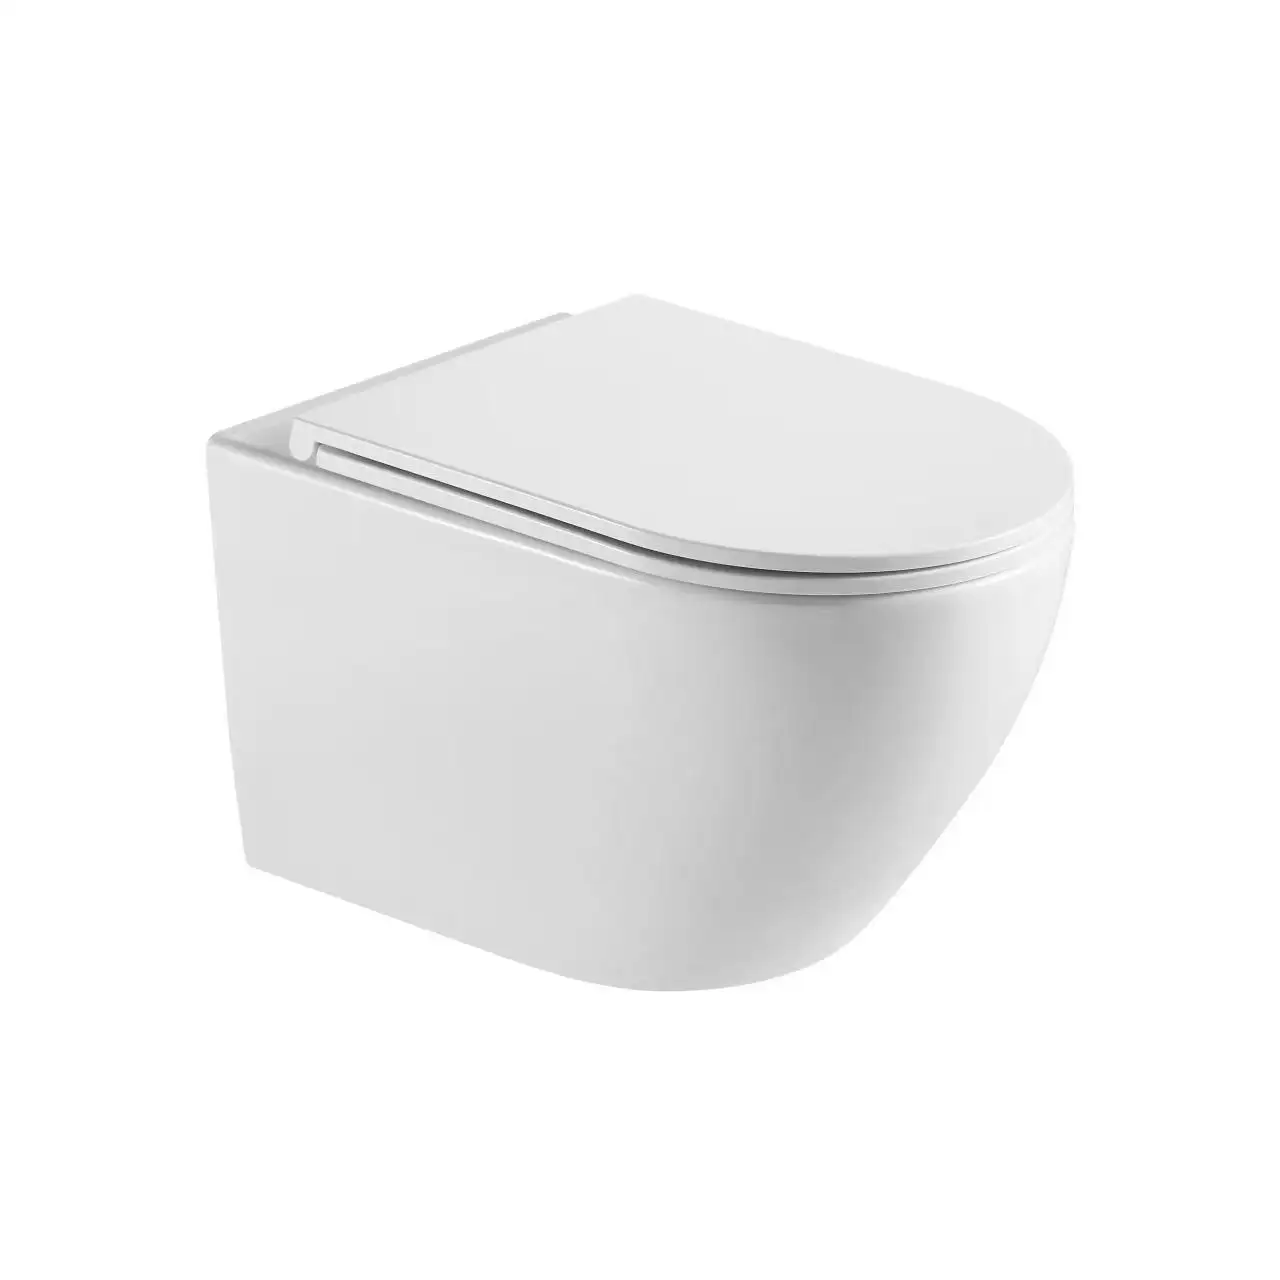 Ceramic Sanitary Ware One Piece White Rimless Wall Hung Wc Toilet For Bathroom GX-15005